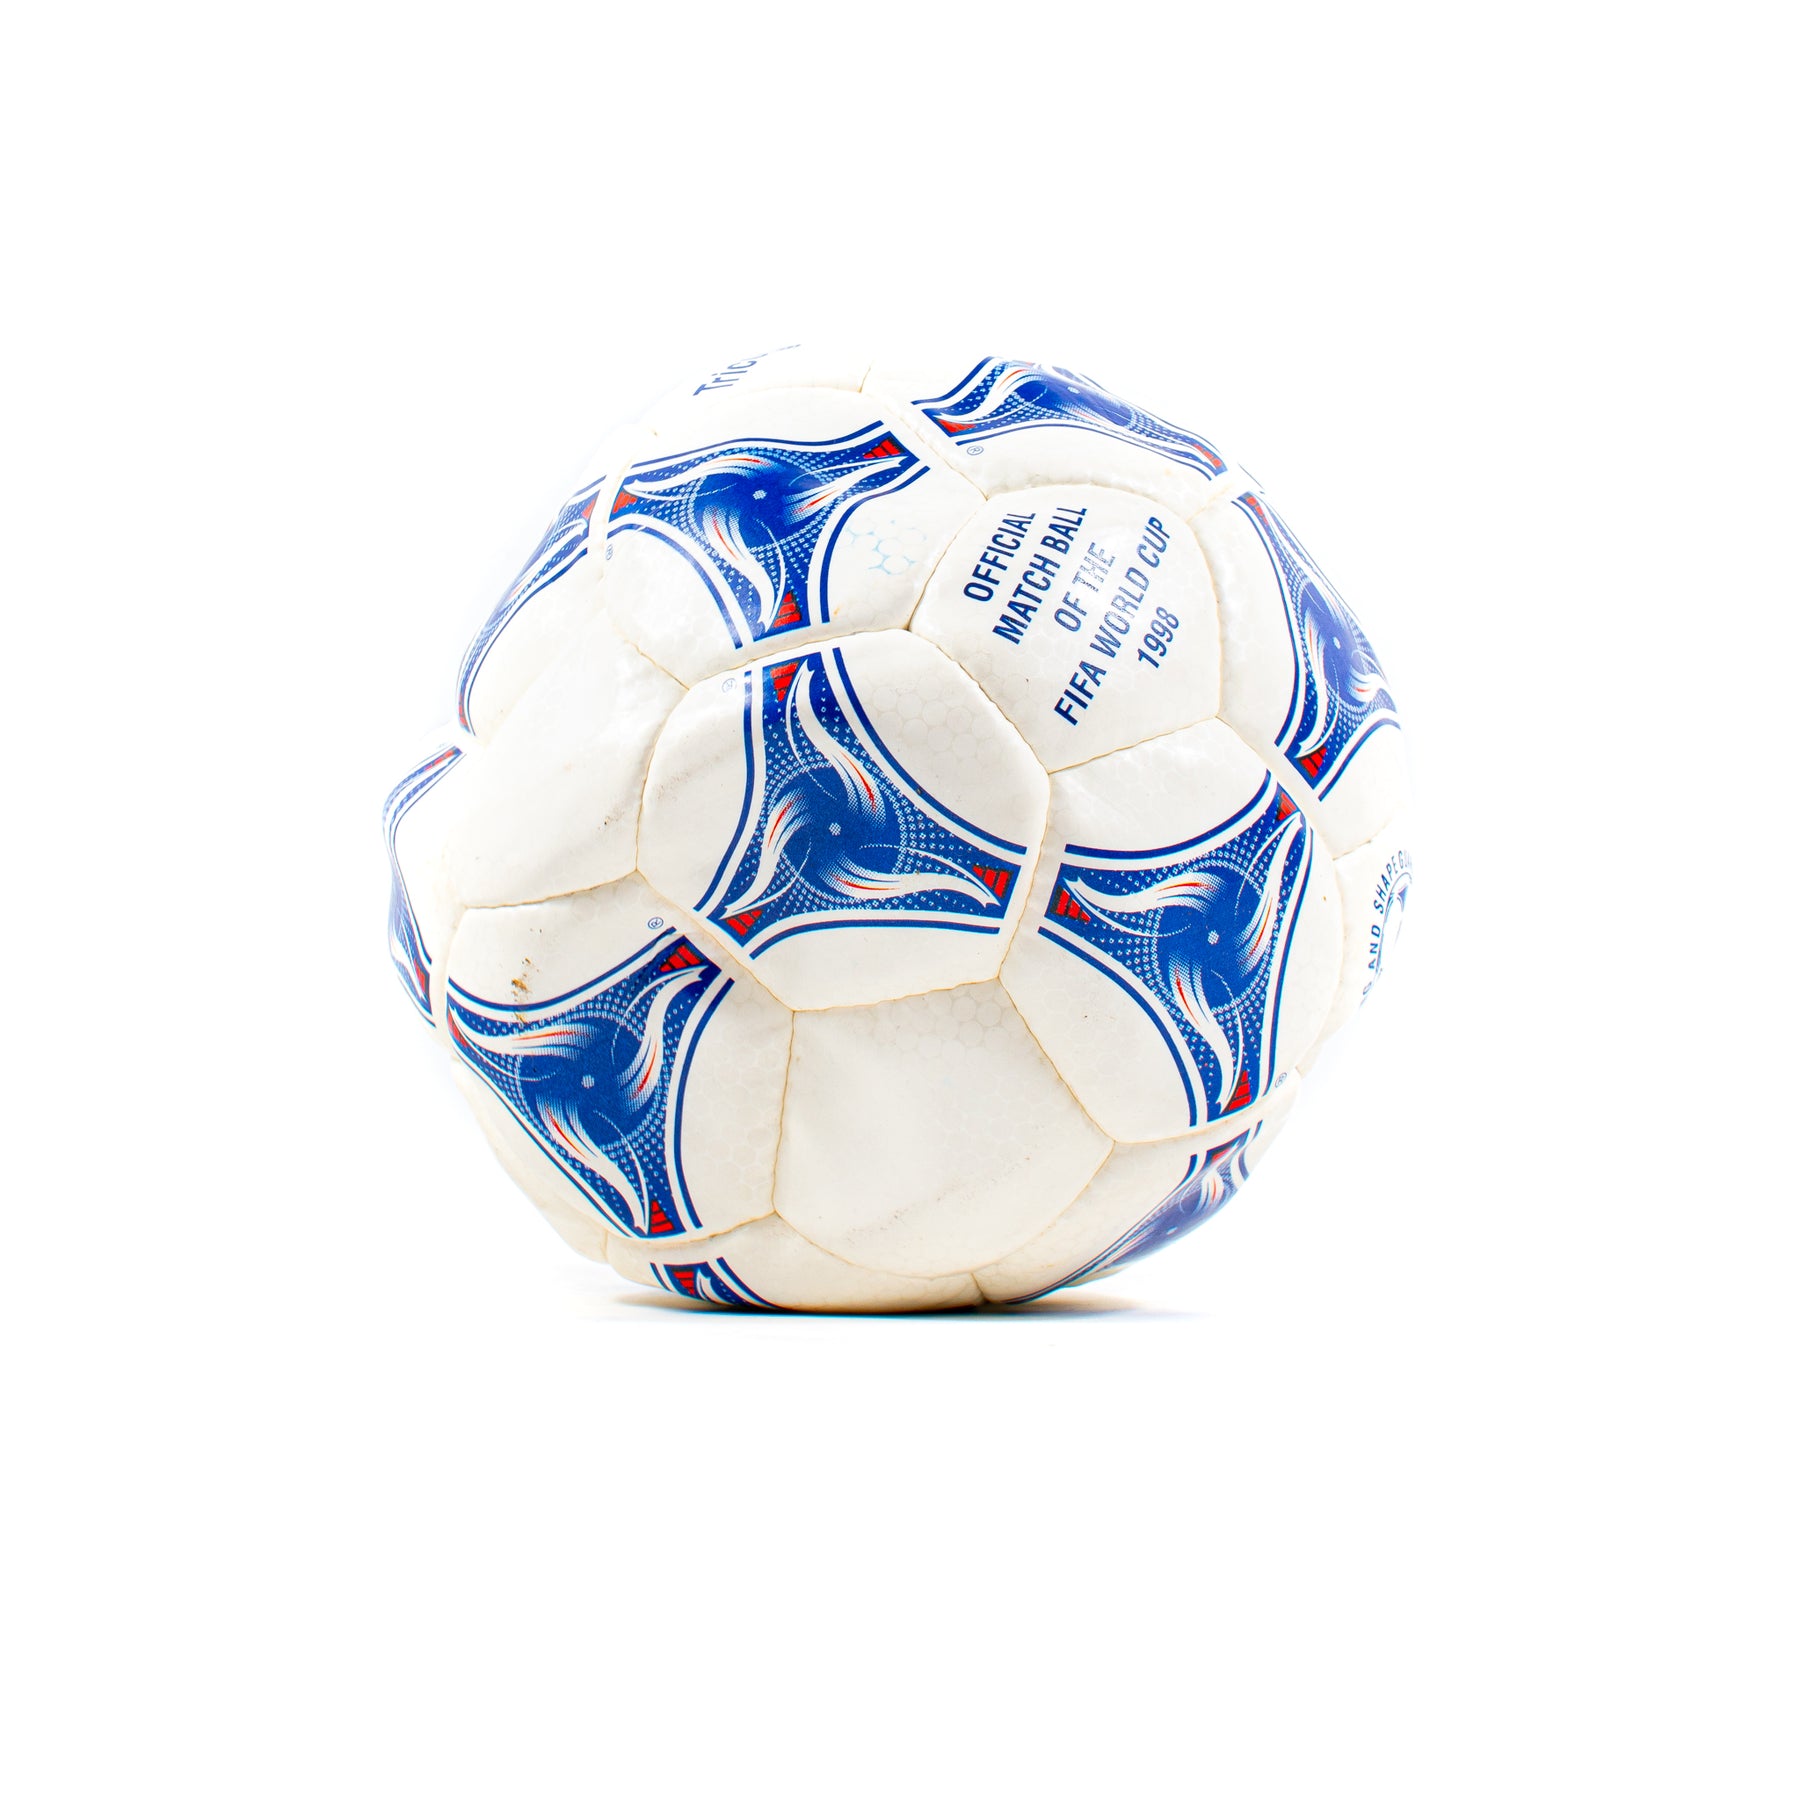 Adidas Tricolor France 1998 World Cup Match Ball *Defect*